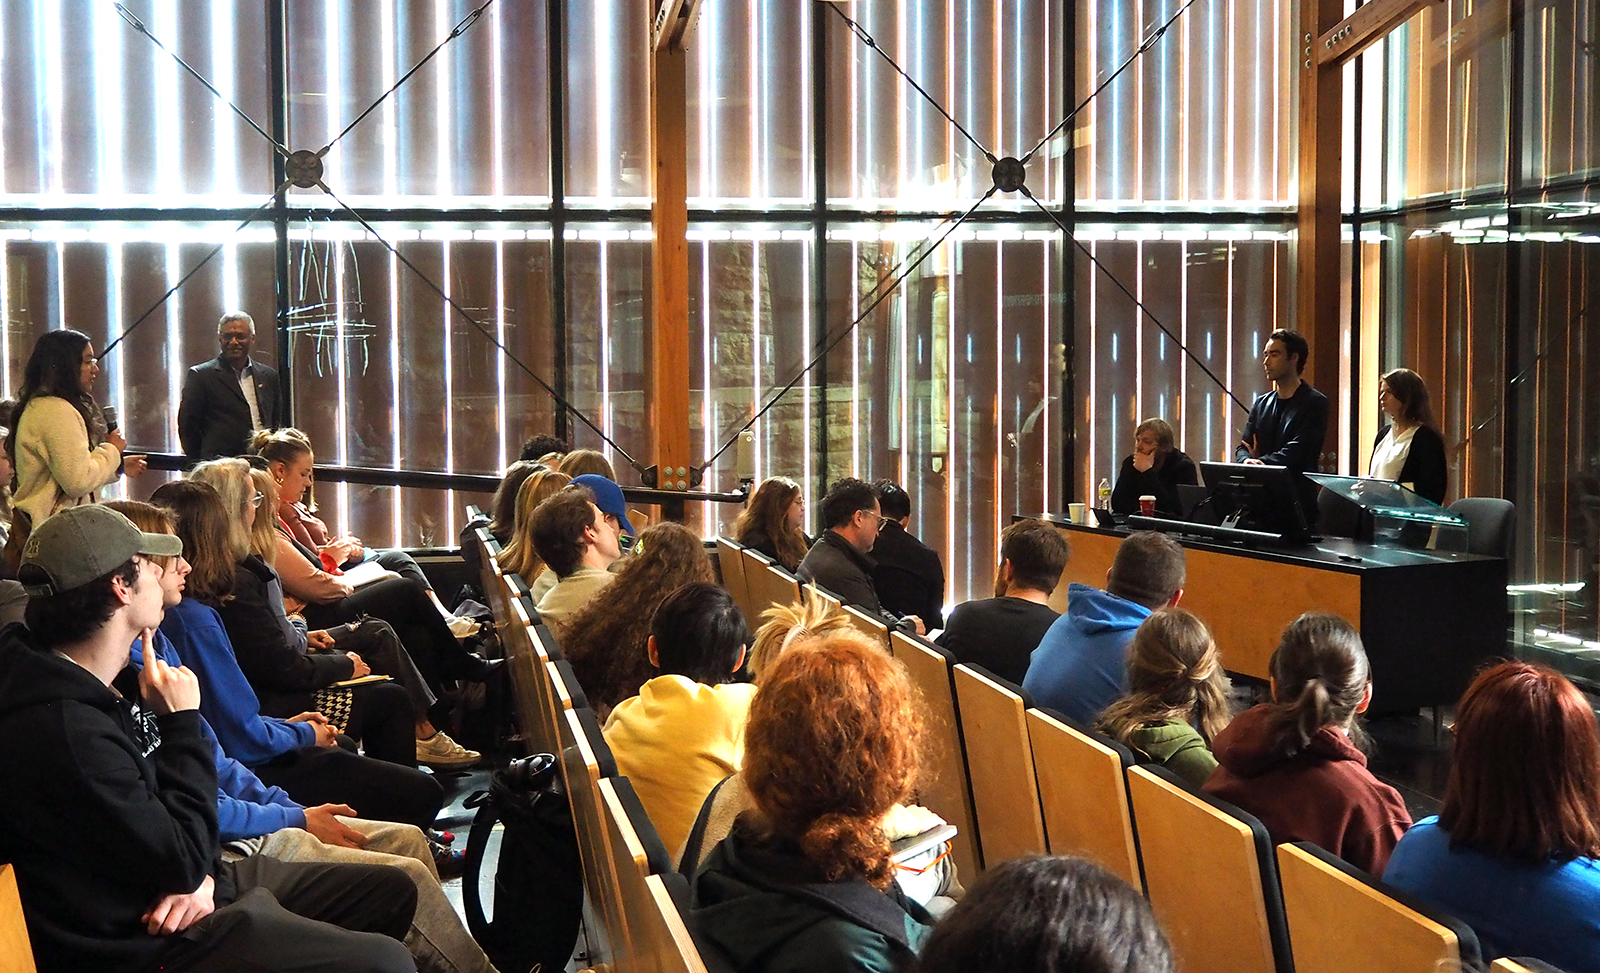 Student holds microphone posing a question to presenters in full, glass-walled auditorium. Sunlight enters the space through vertical wood louvers.